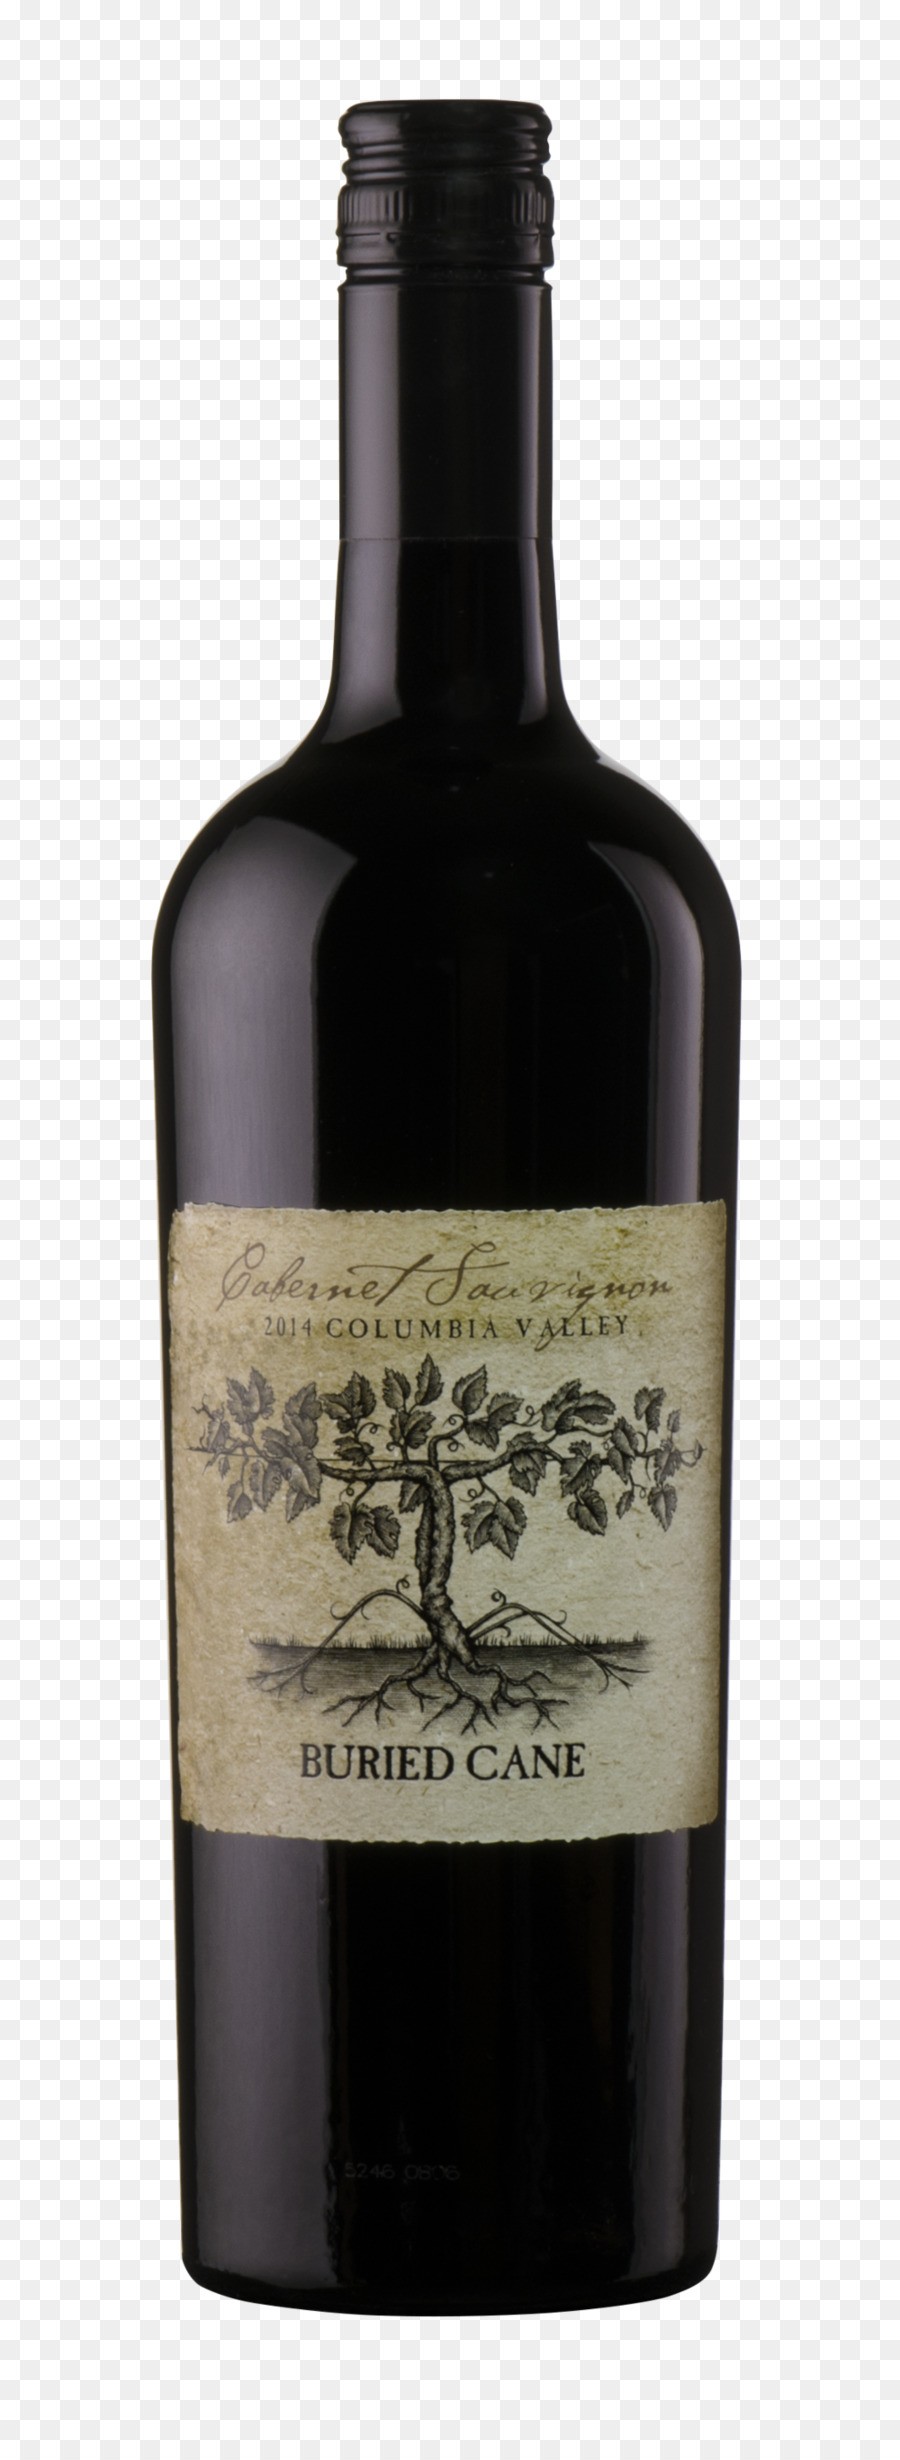 Cabernet Sauvignon，Rutherford PNG